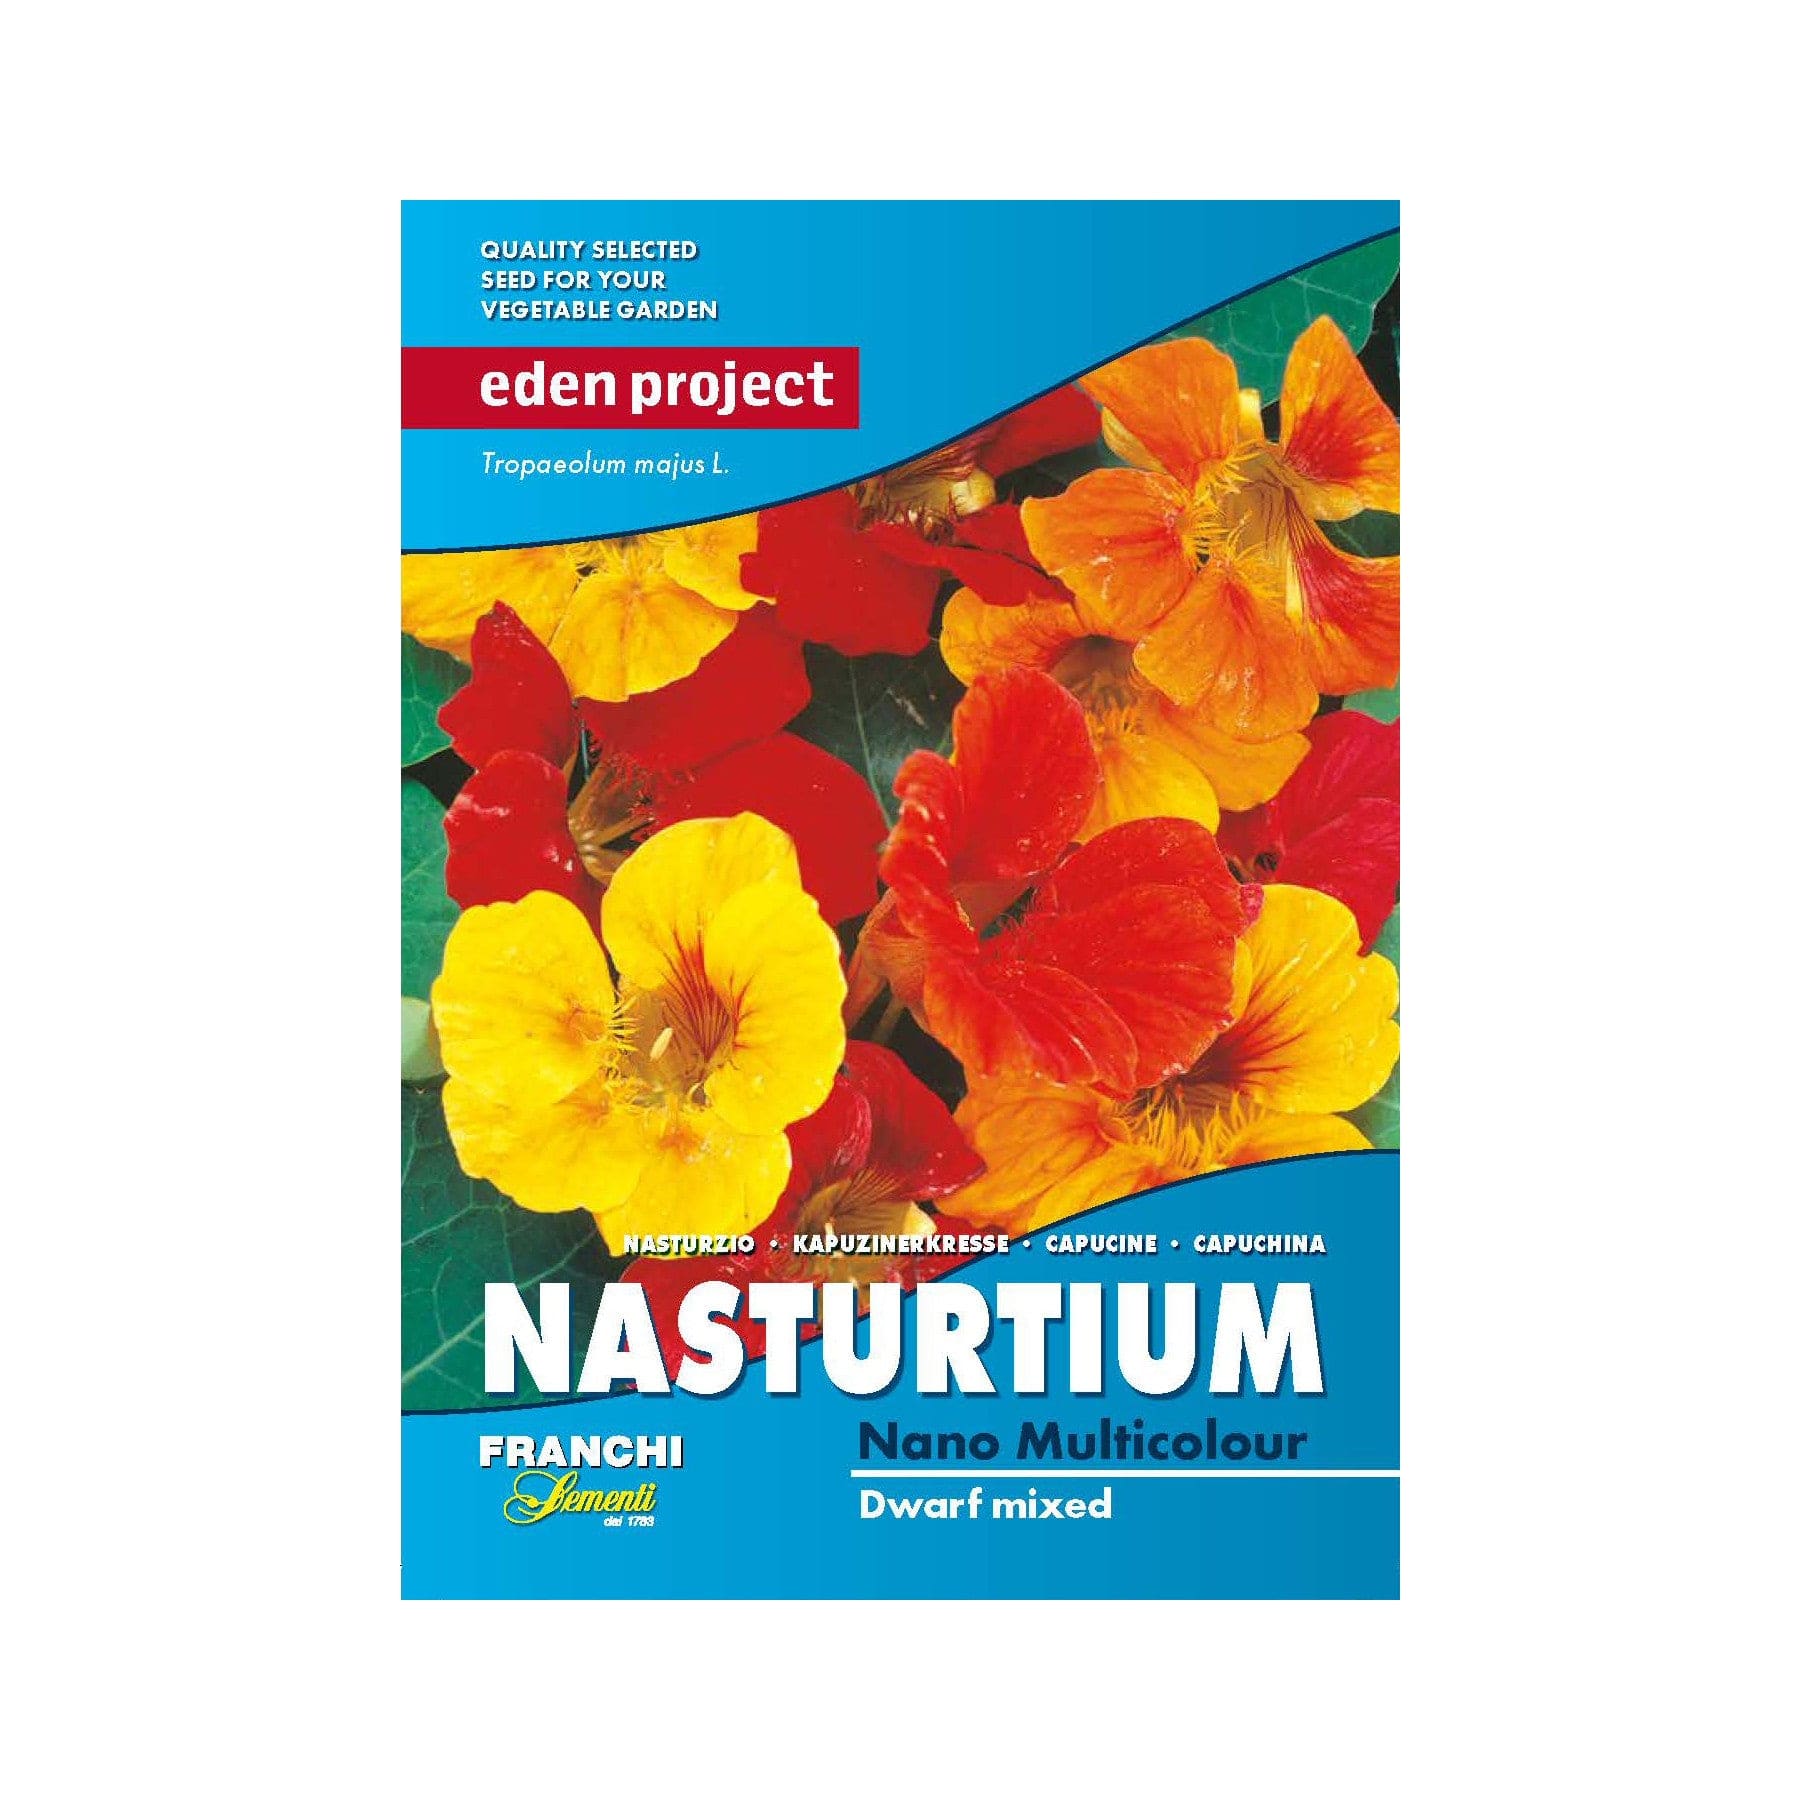 Eden Project Nasturtium Seed Packet, Franchi Sementi Nano Multicolour Dwarf Mixed Variety, Tropaeolum majus L., Quality Selected Seeds for Vegetable Garden, Vibrant Yellow and Orange Flowers